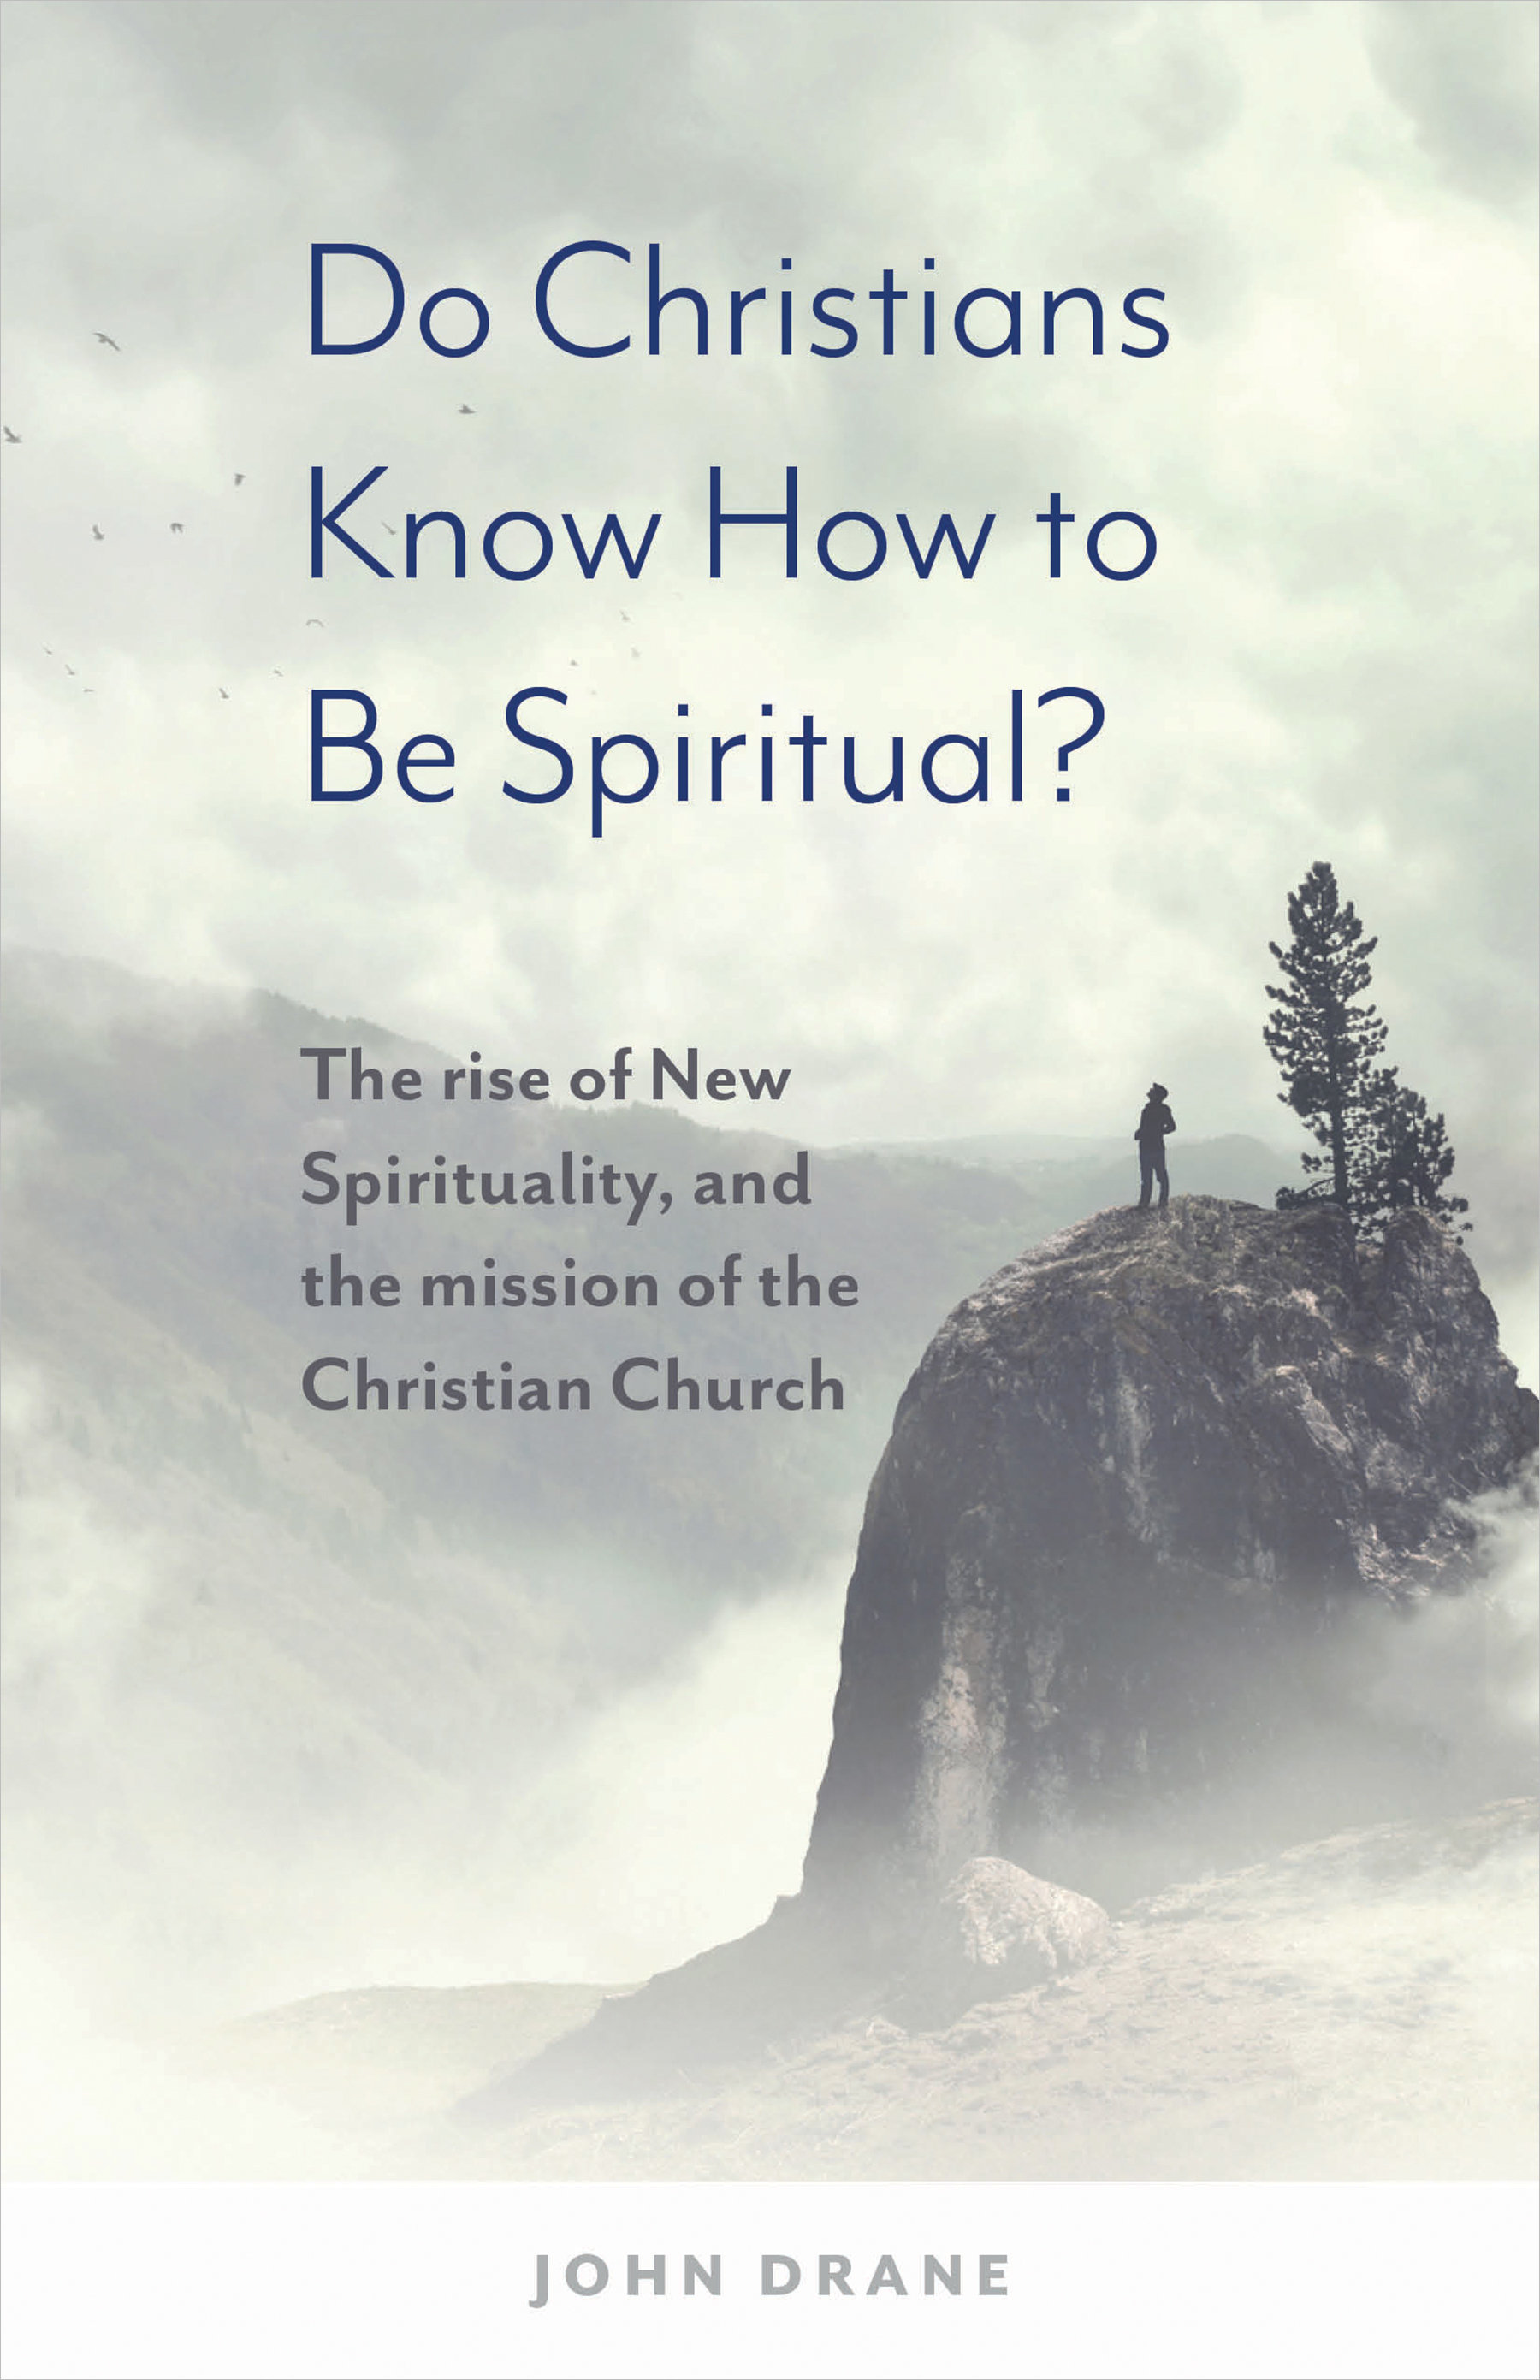 Do Christians Know How to be Spiritual?: The rise of New Spirituality, and the mission of the Christian Church